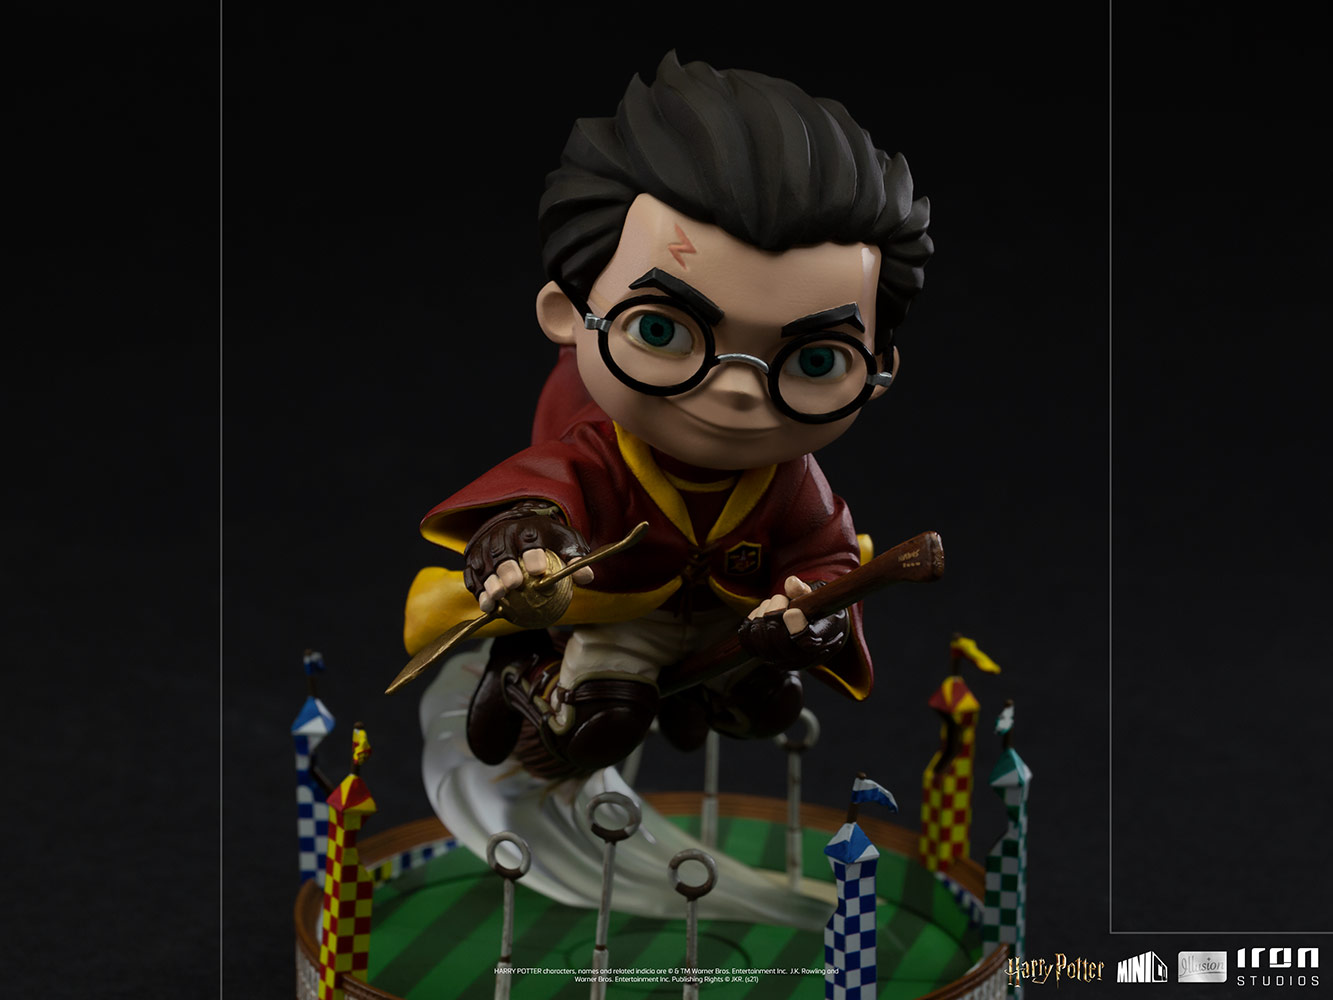 Harry Potter at the Quidditch Match Mini Co.- Prototype Shown